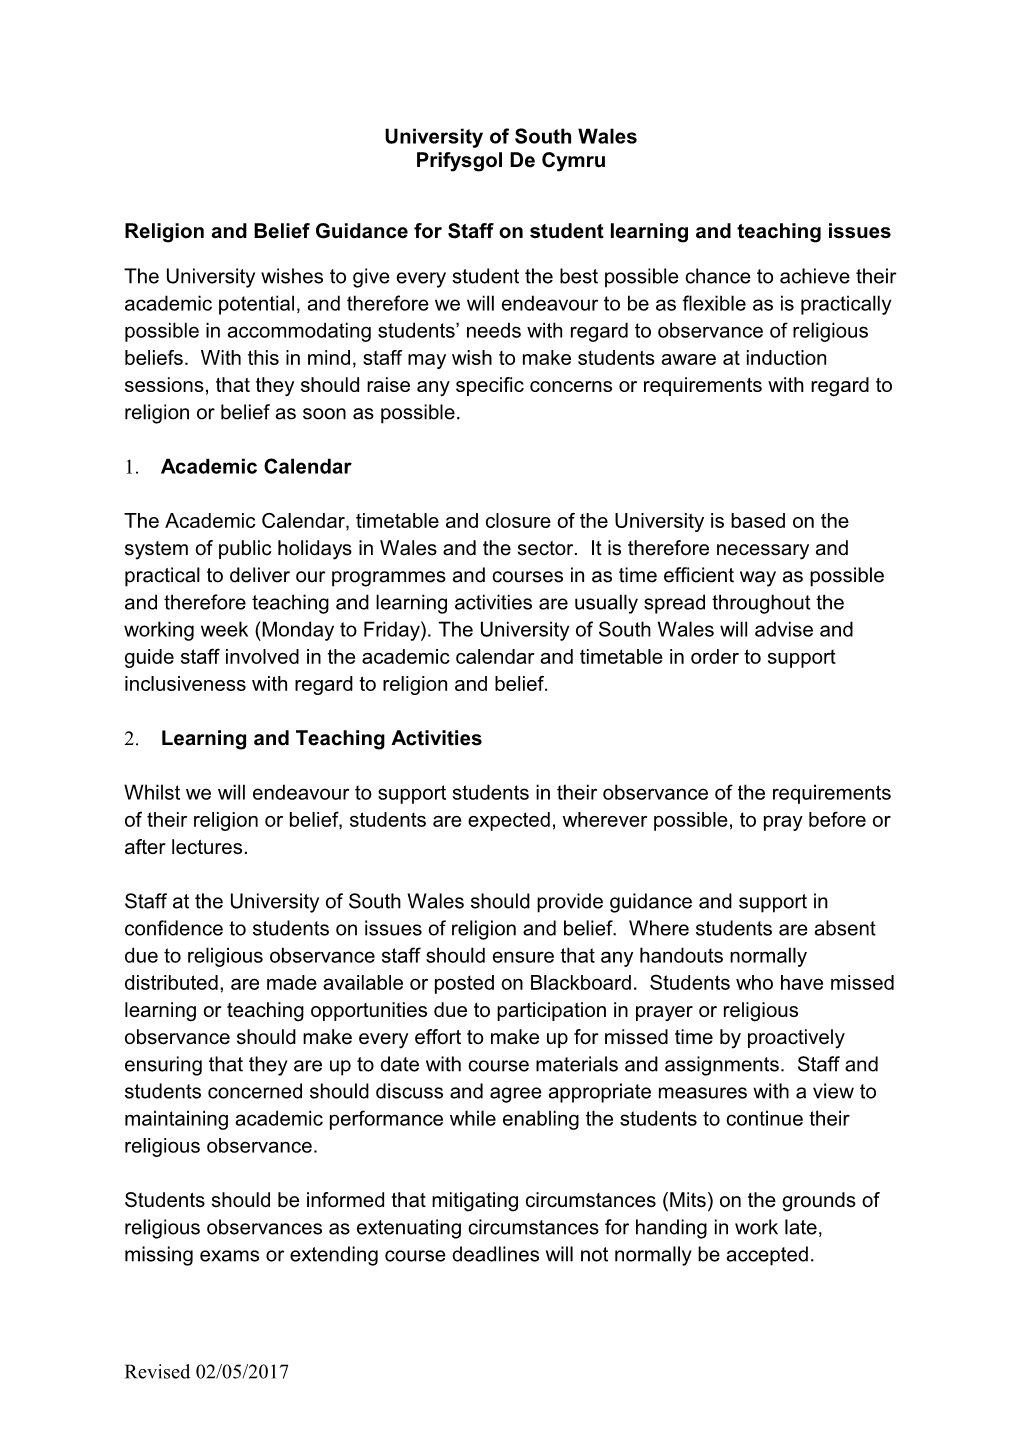 Religion and Belief Guidance for Staff on Student Learning and Teaching Issues